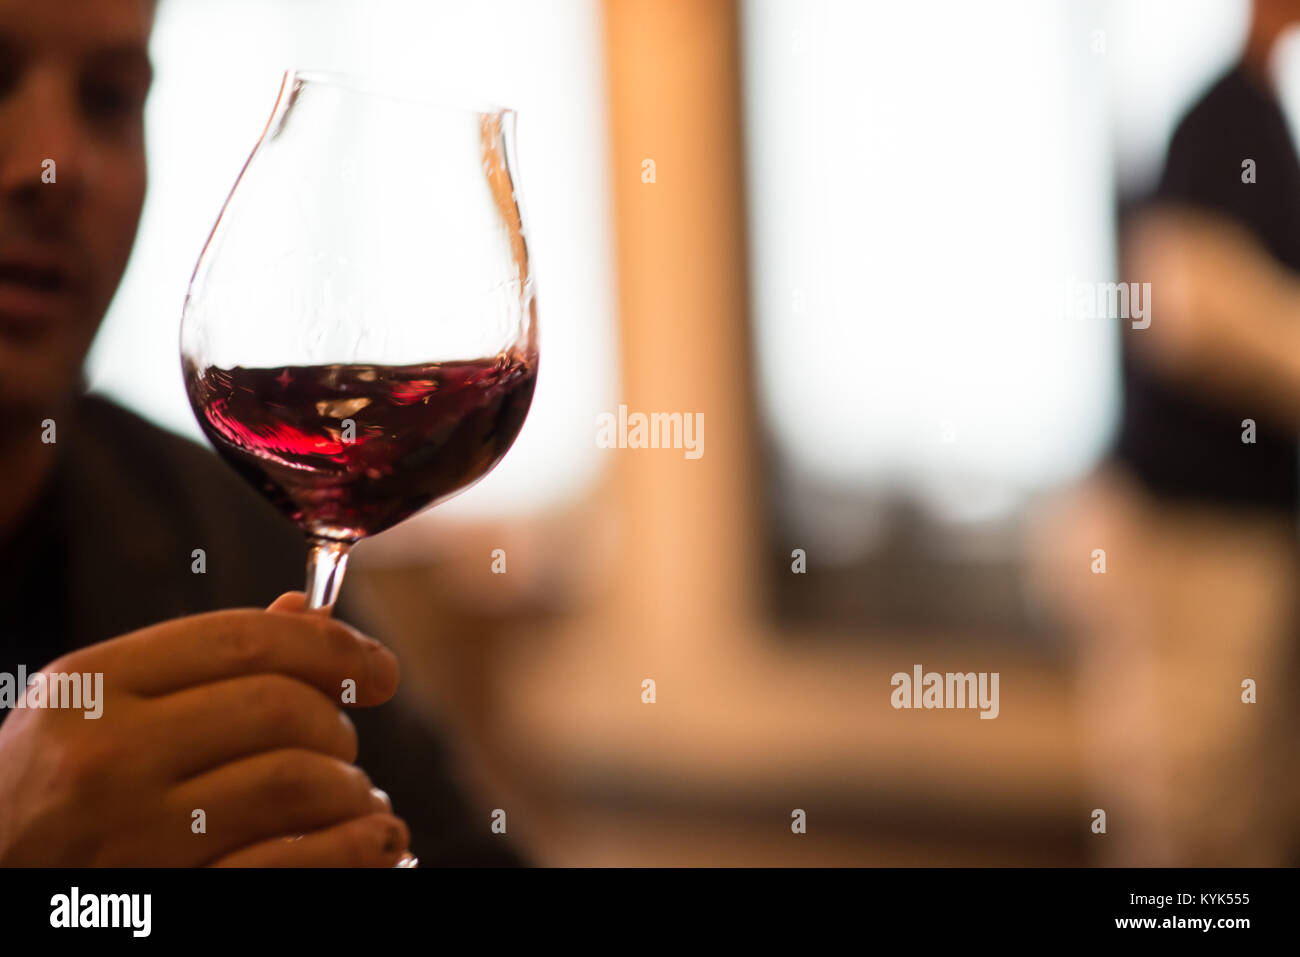 Guy Holding A Wine Glass Stock Photo